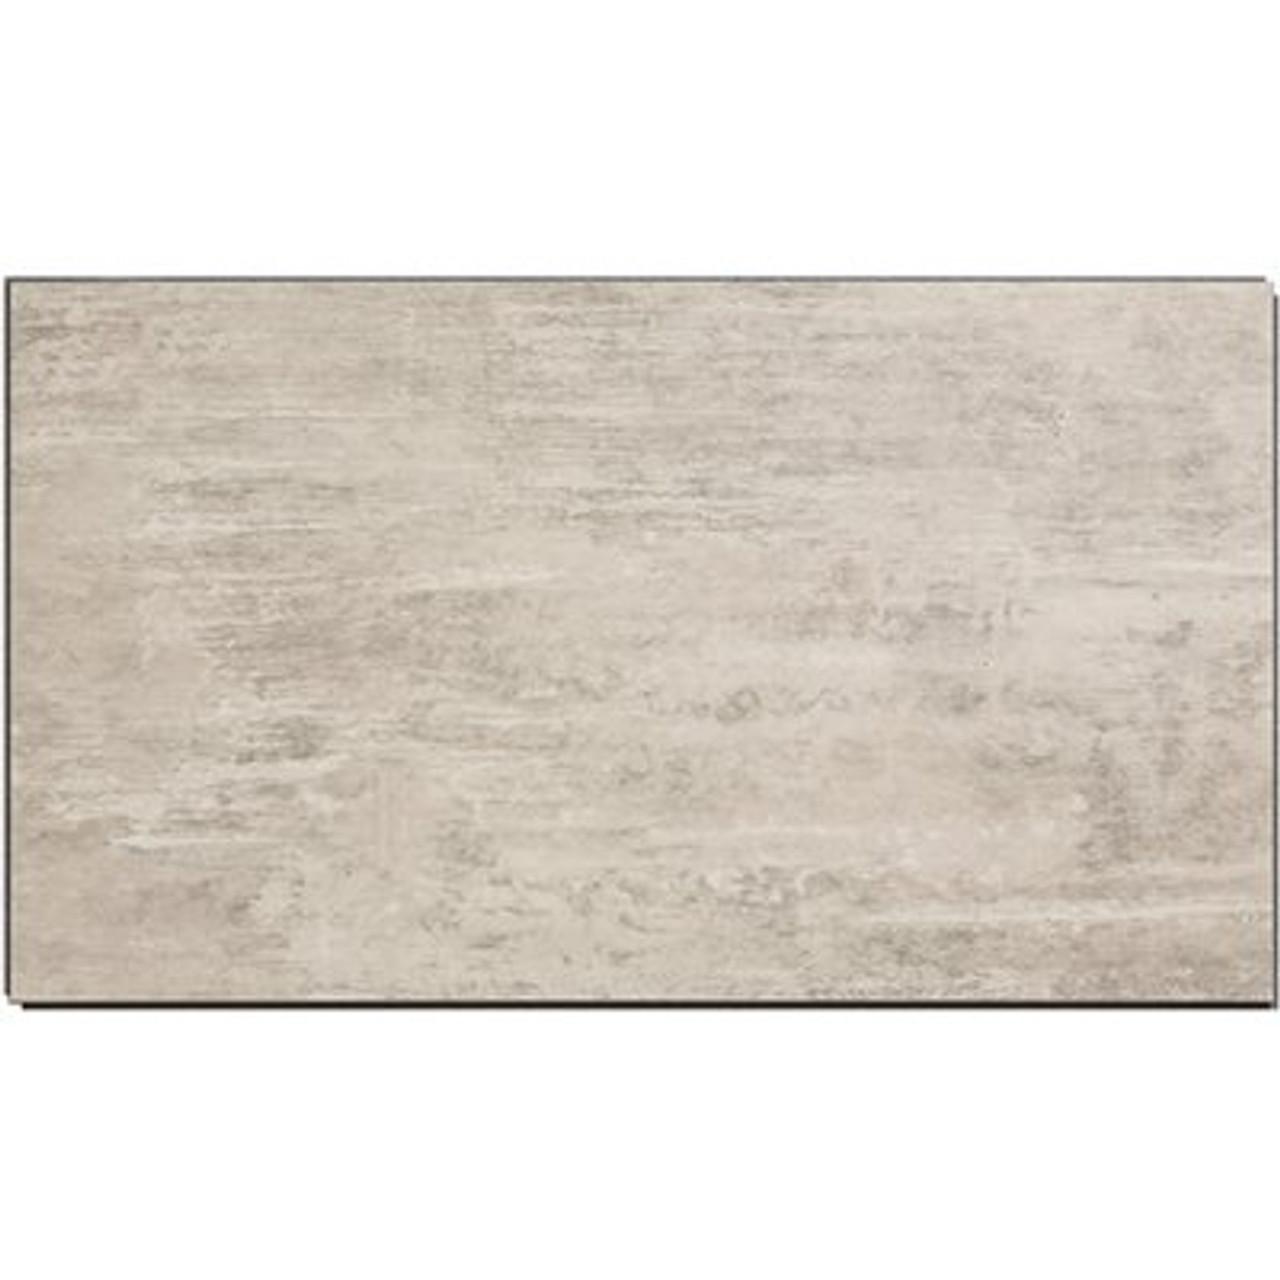 PALISADE 25.6 in. L x 14.8 in. W Wind Gust Waterproof Adhesive No Grout Vinyl Wall Tile (21 sq. ft./case)